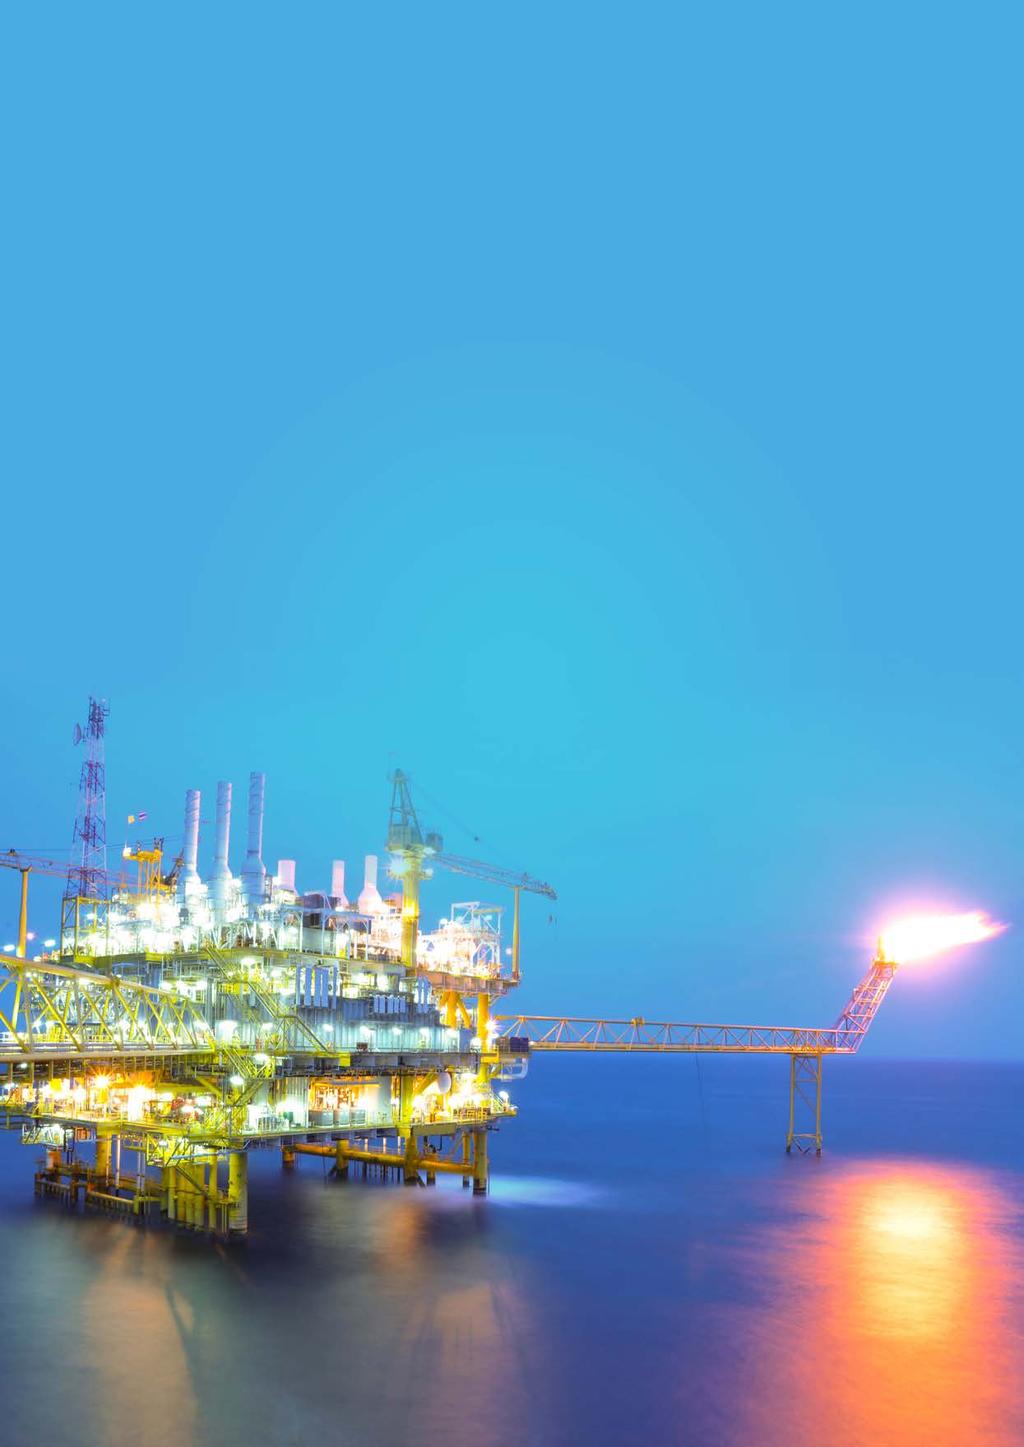 TRATOS OIL&GAS BS6883 - BS7917 TRATOS OIL&GAS Tratos have been involved in the Oil & Gas industry for over 40 years, manufacturing and